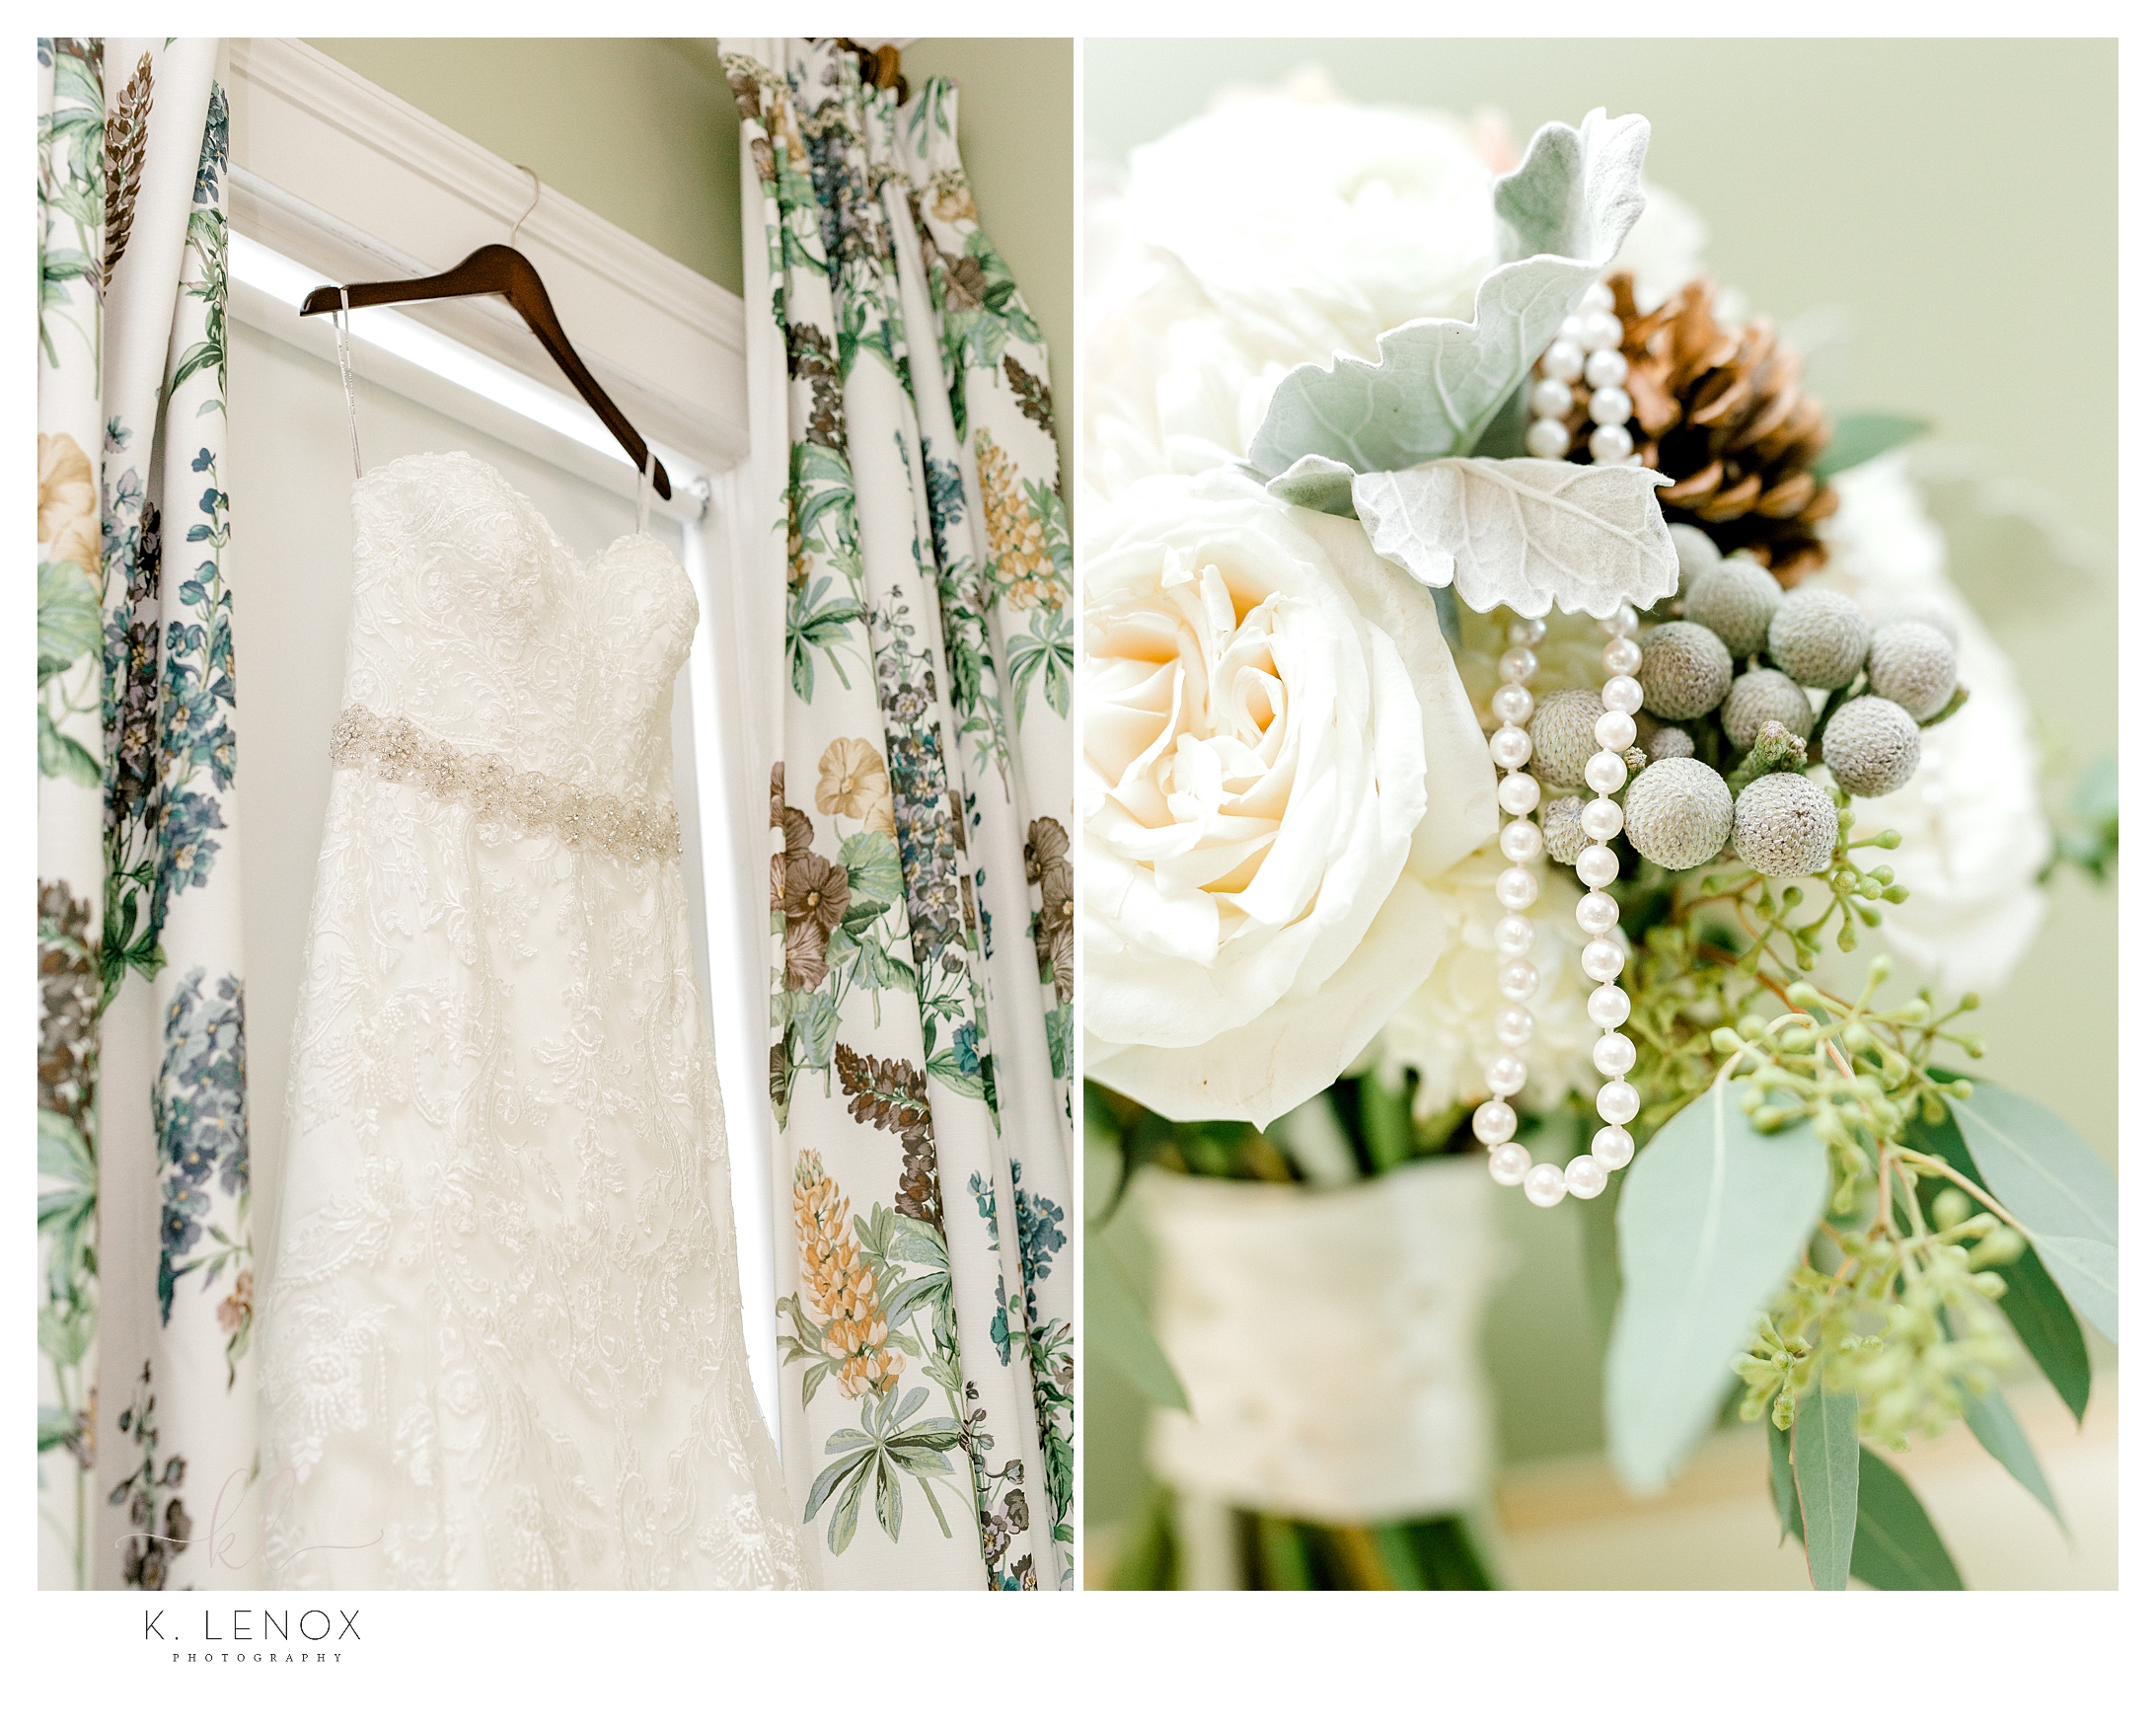 Detail photos showing bouquet with pearls and a wedding dress hanging in the window. 